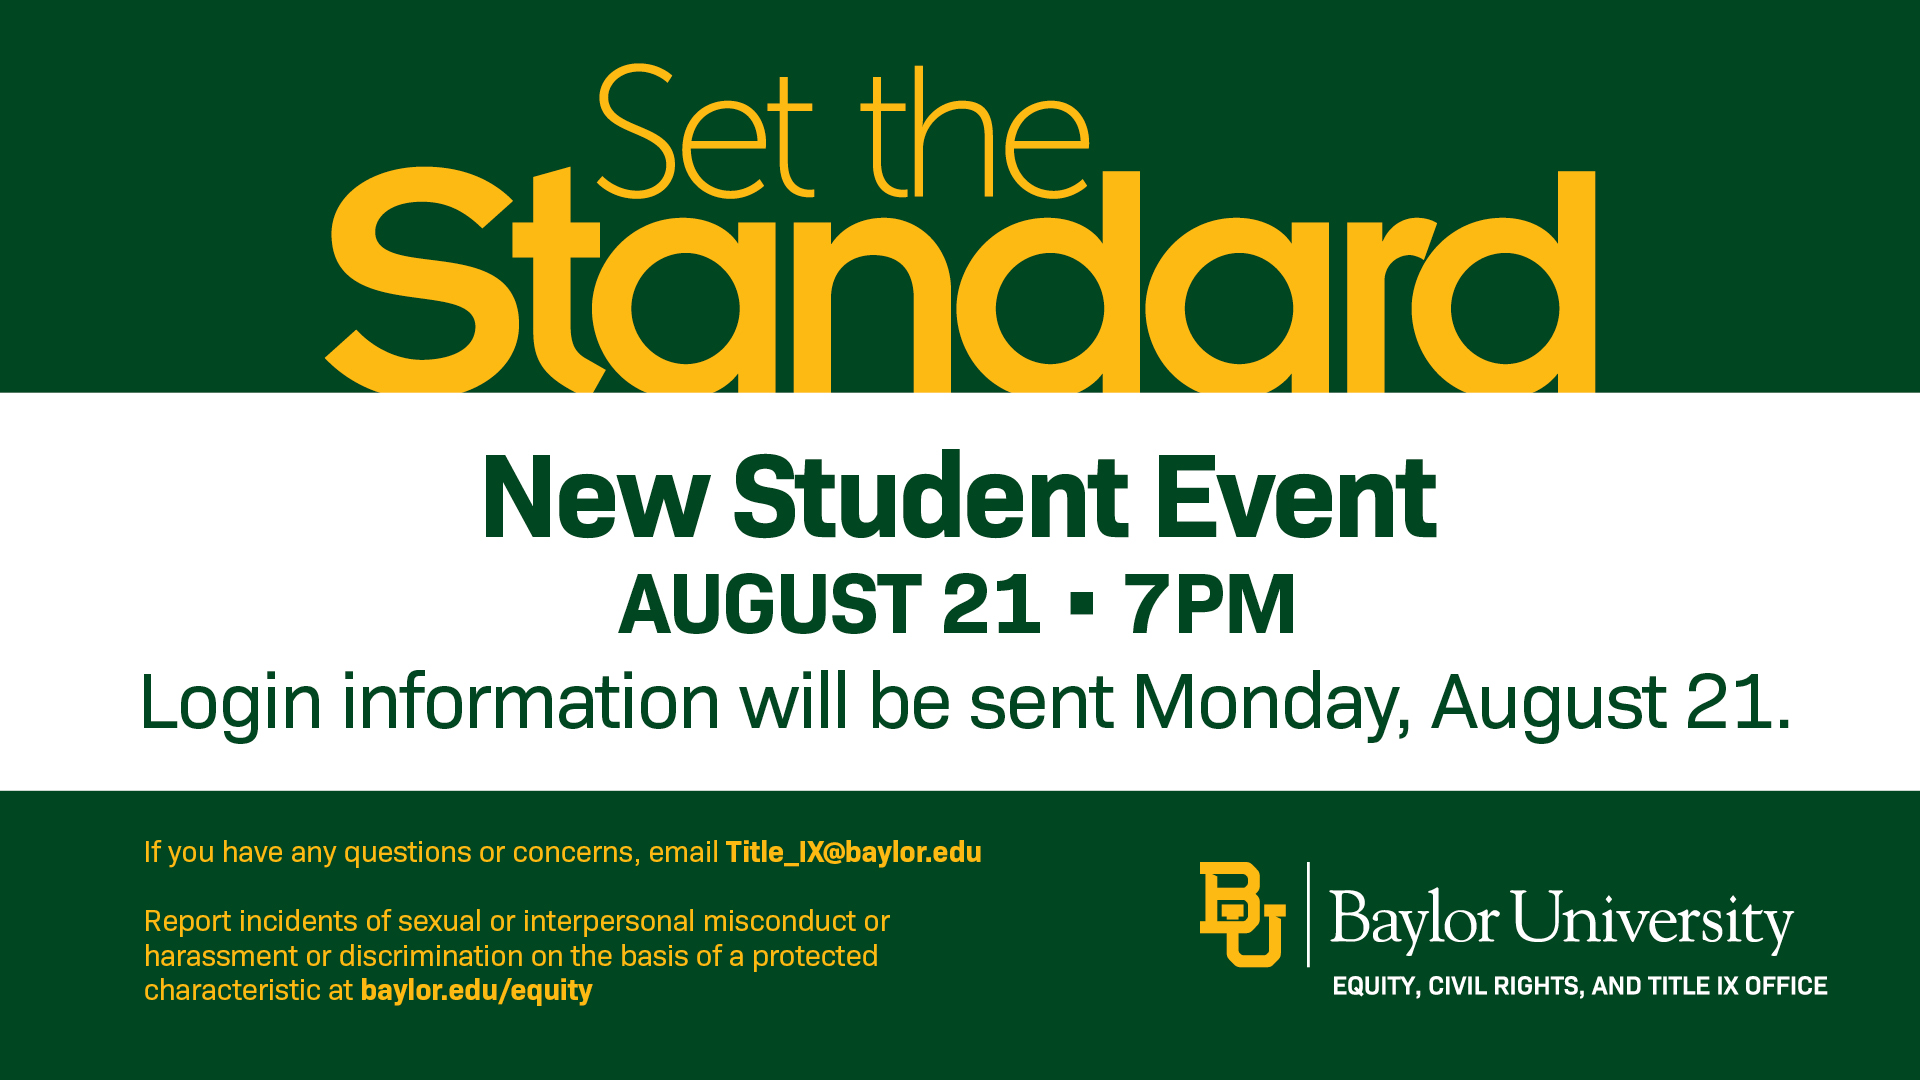 Set the Standard - New Student Event